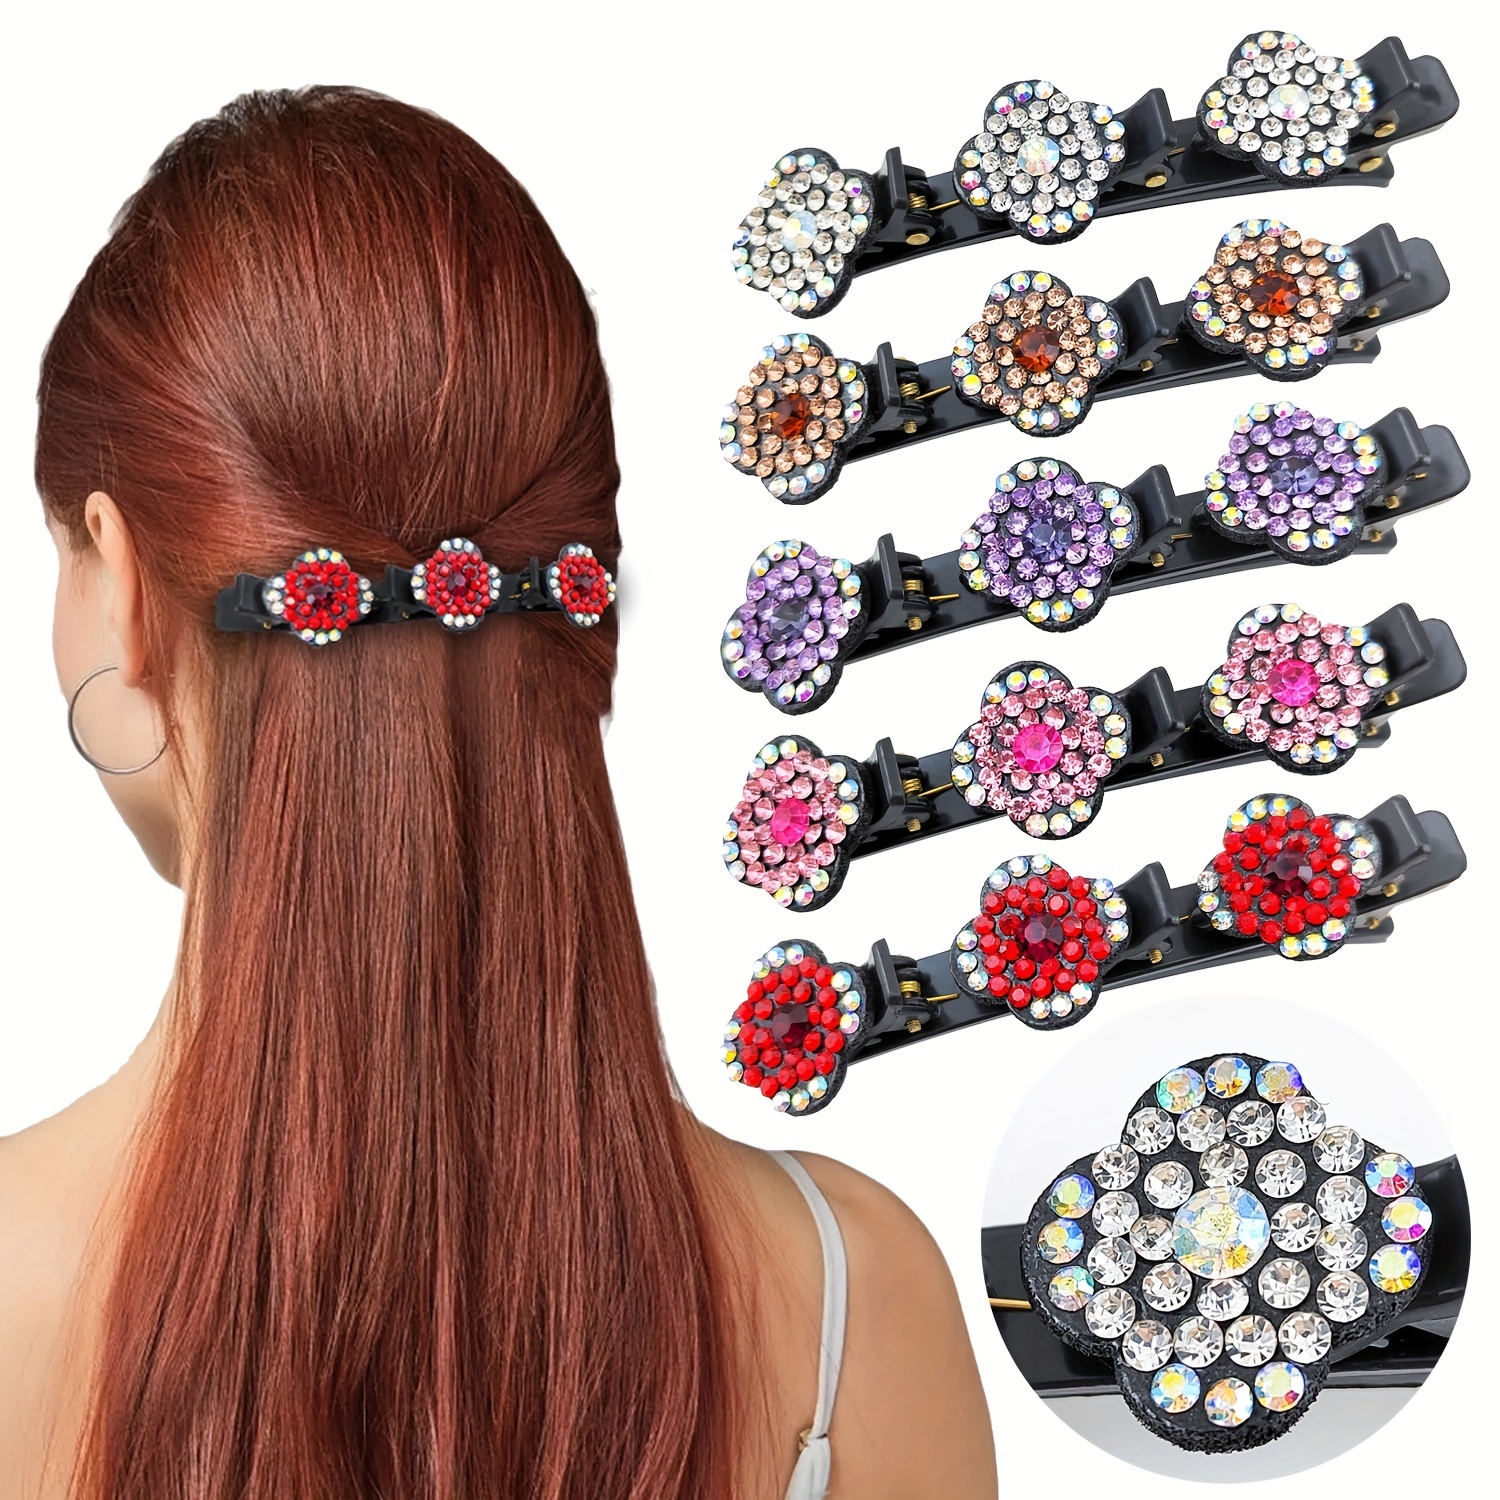 Braided Hair Clip with 3 Small Clips, Sparkling Crystal Stone